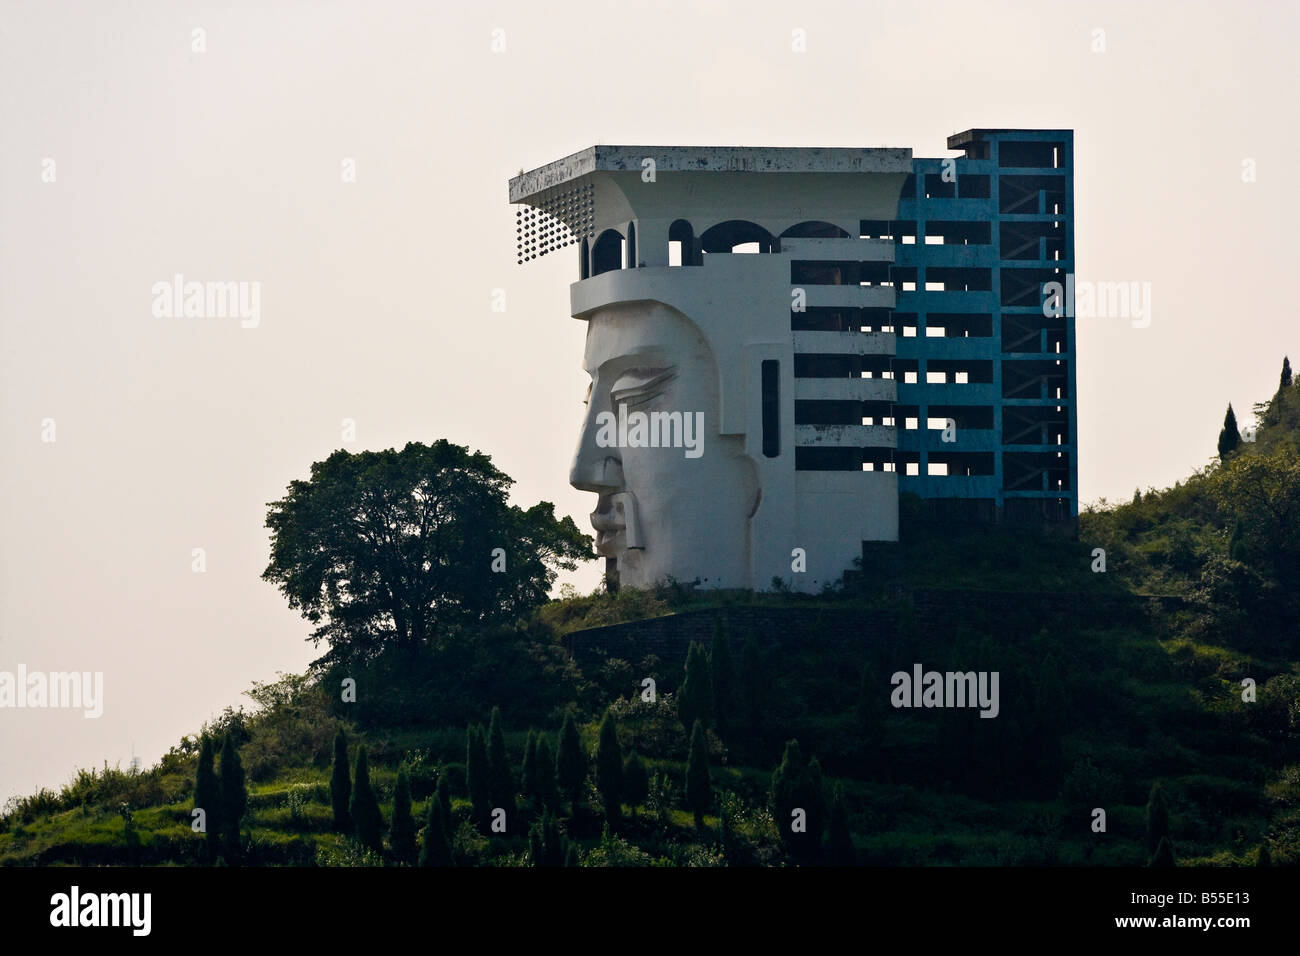 Unfinished hotel in the form of a face near Ghost City Fengdu Yangzi River China JMH3361 Stock Photo